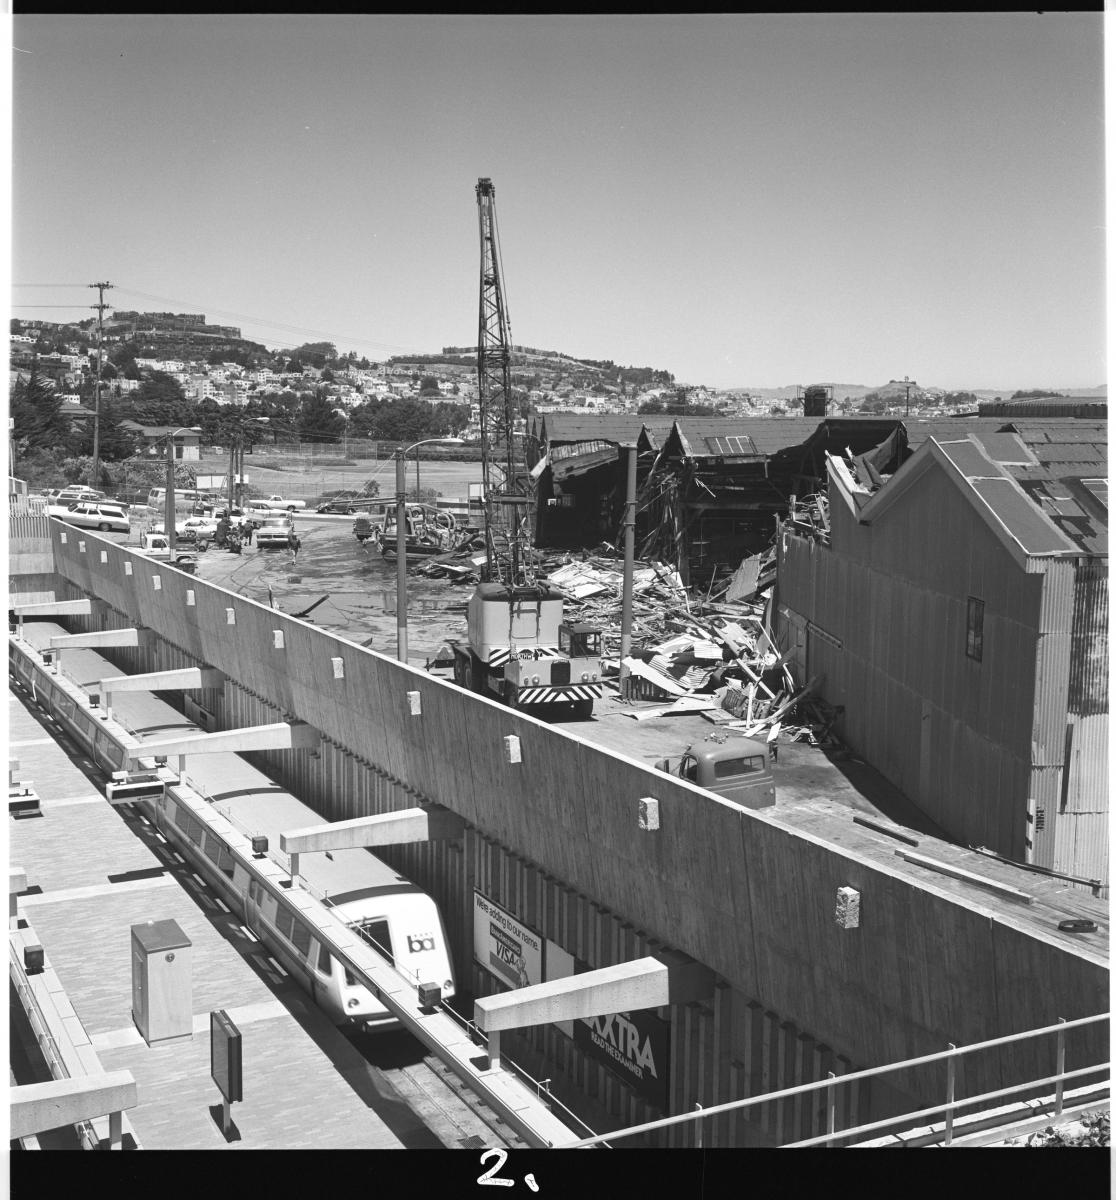 The end of an era came on May 31, 1977 when Elkton Shops was torn down after 70 years of service. In less than 3 years, a rail yard filled with brand new light rail vehicles would stand in place of the old shop buildings.